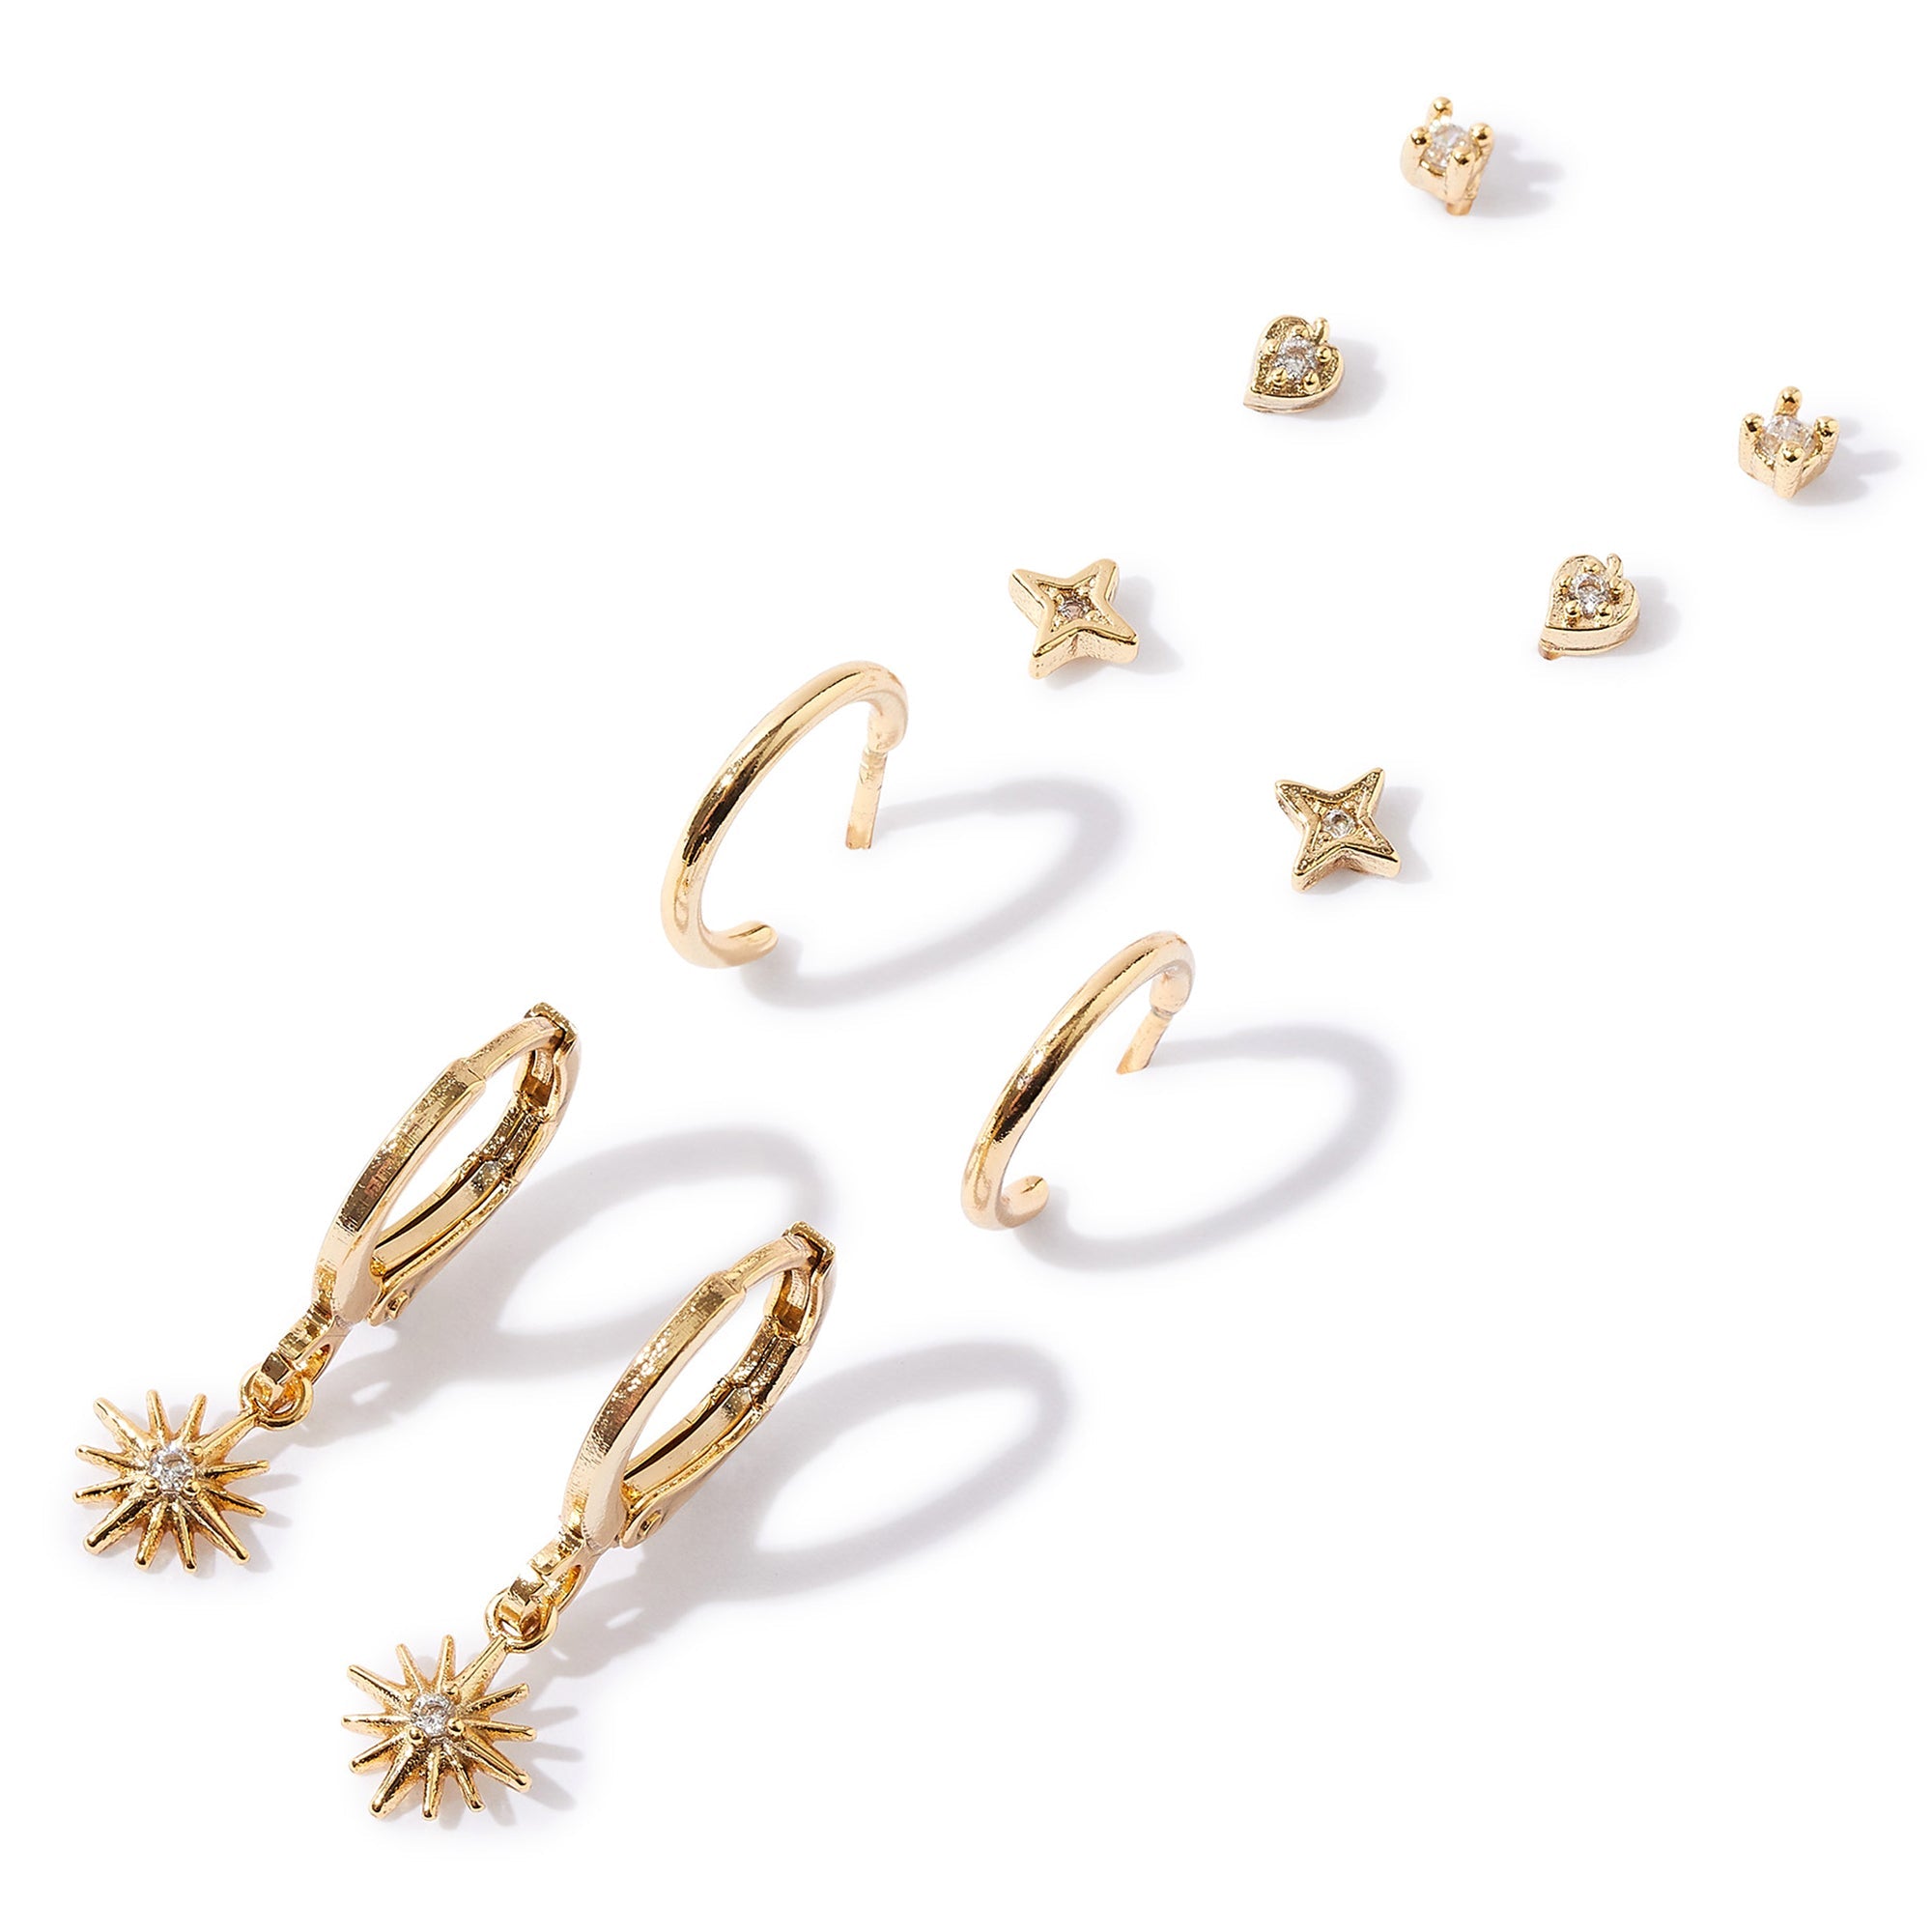 Real Gold Plated 10 Pack Celestial Sparkle Stud And Hoop Earring For Women By Accessorize London